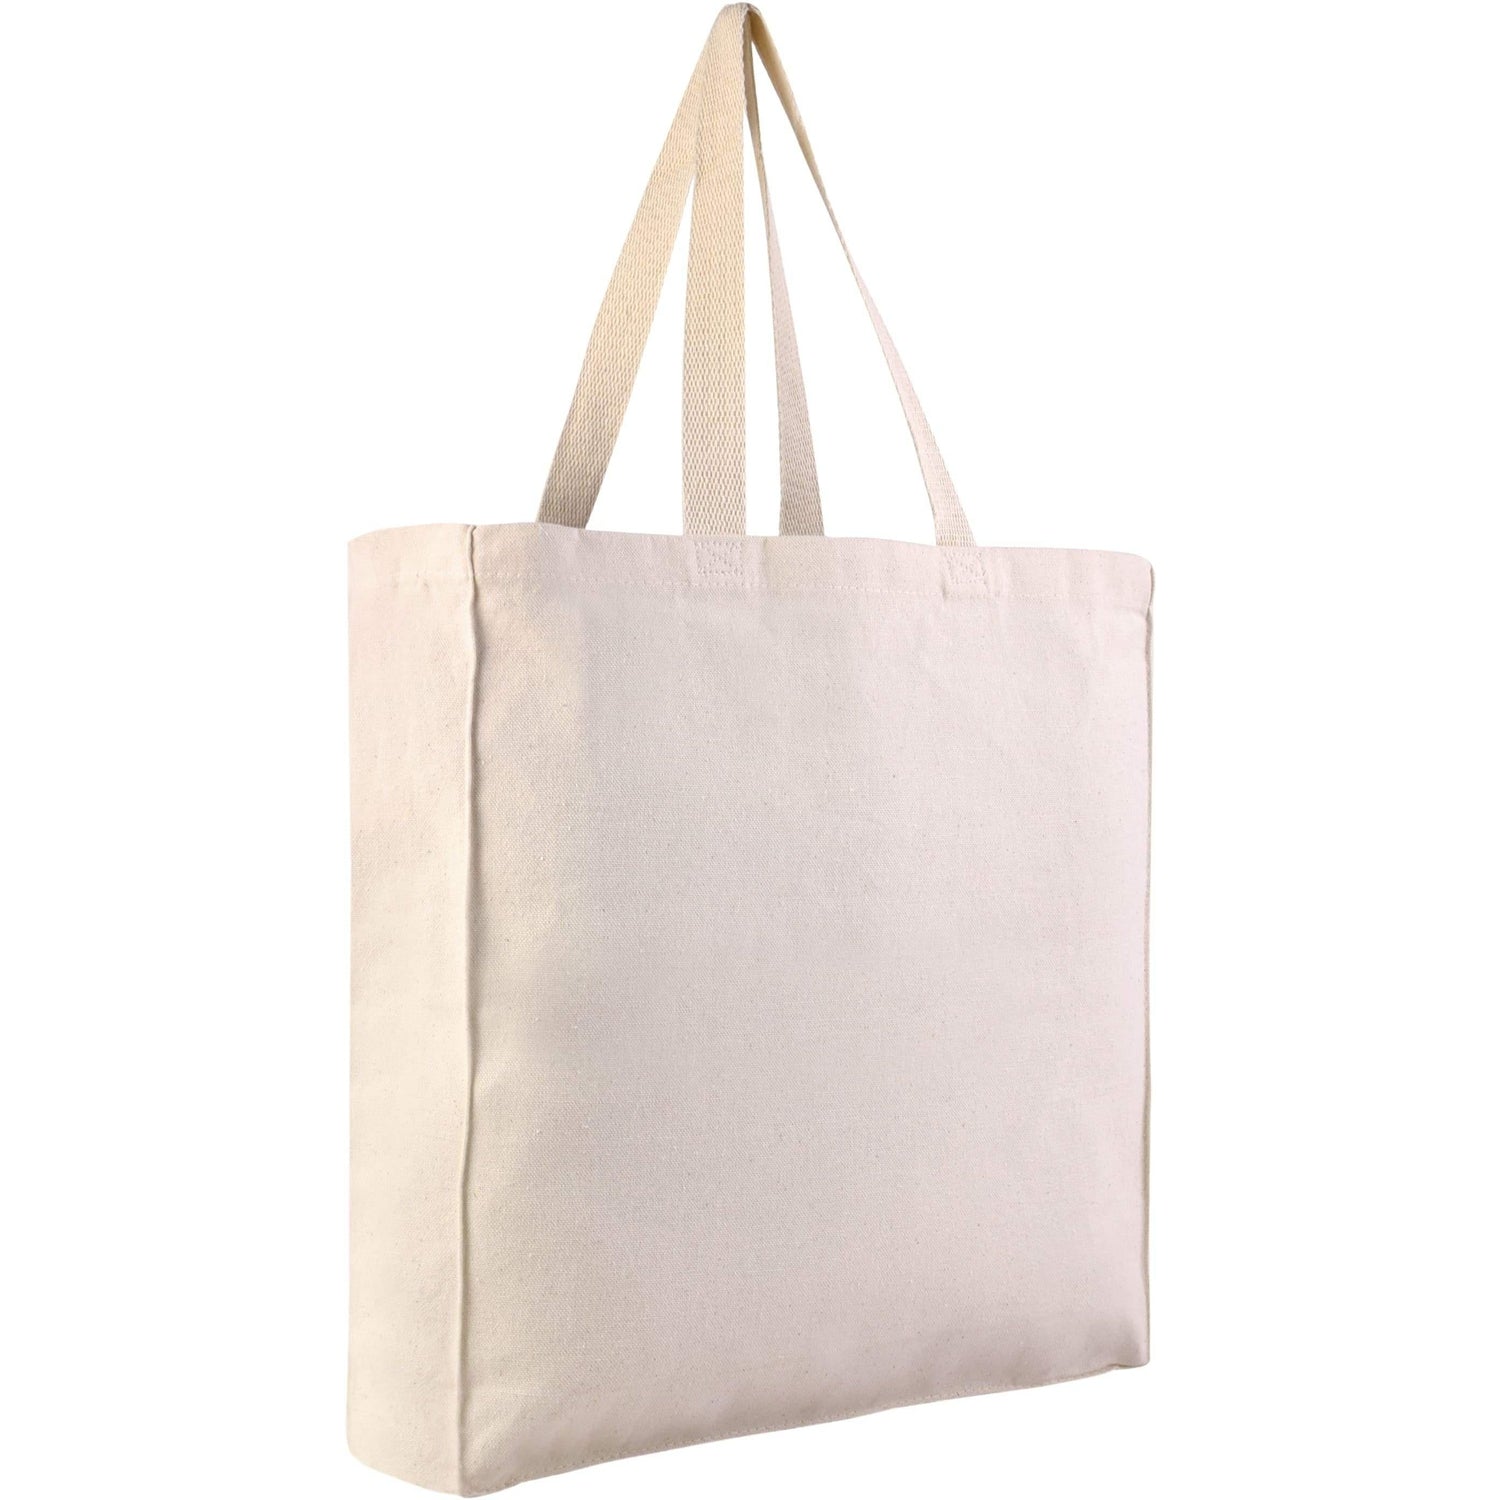 Sturdy Canvas Shopping Tote Bags Wholesale with Gussets – BagzDepot™